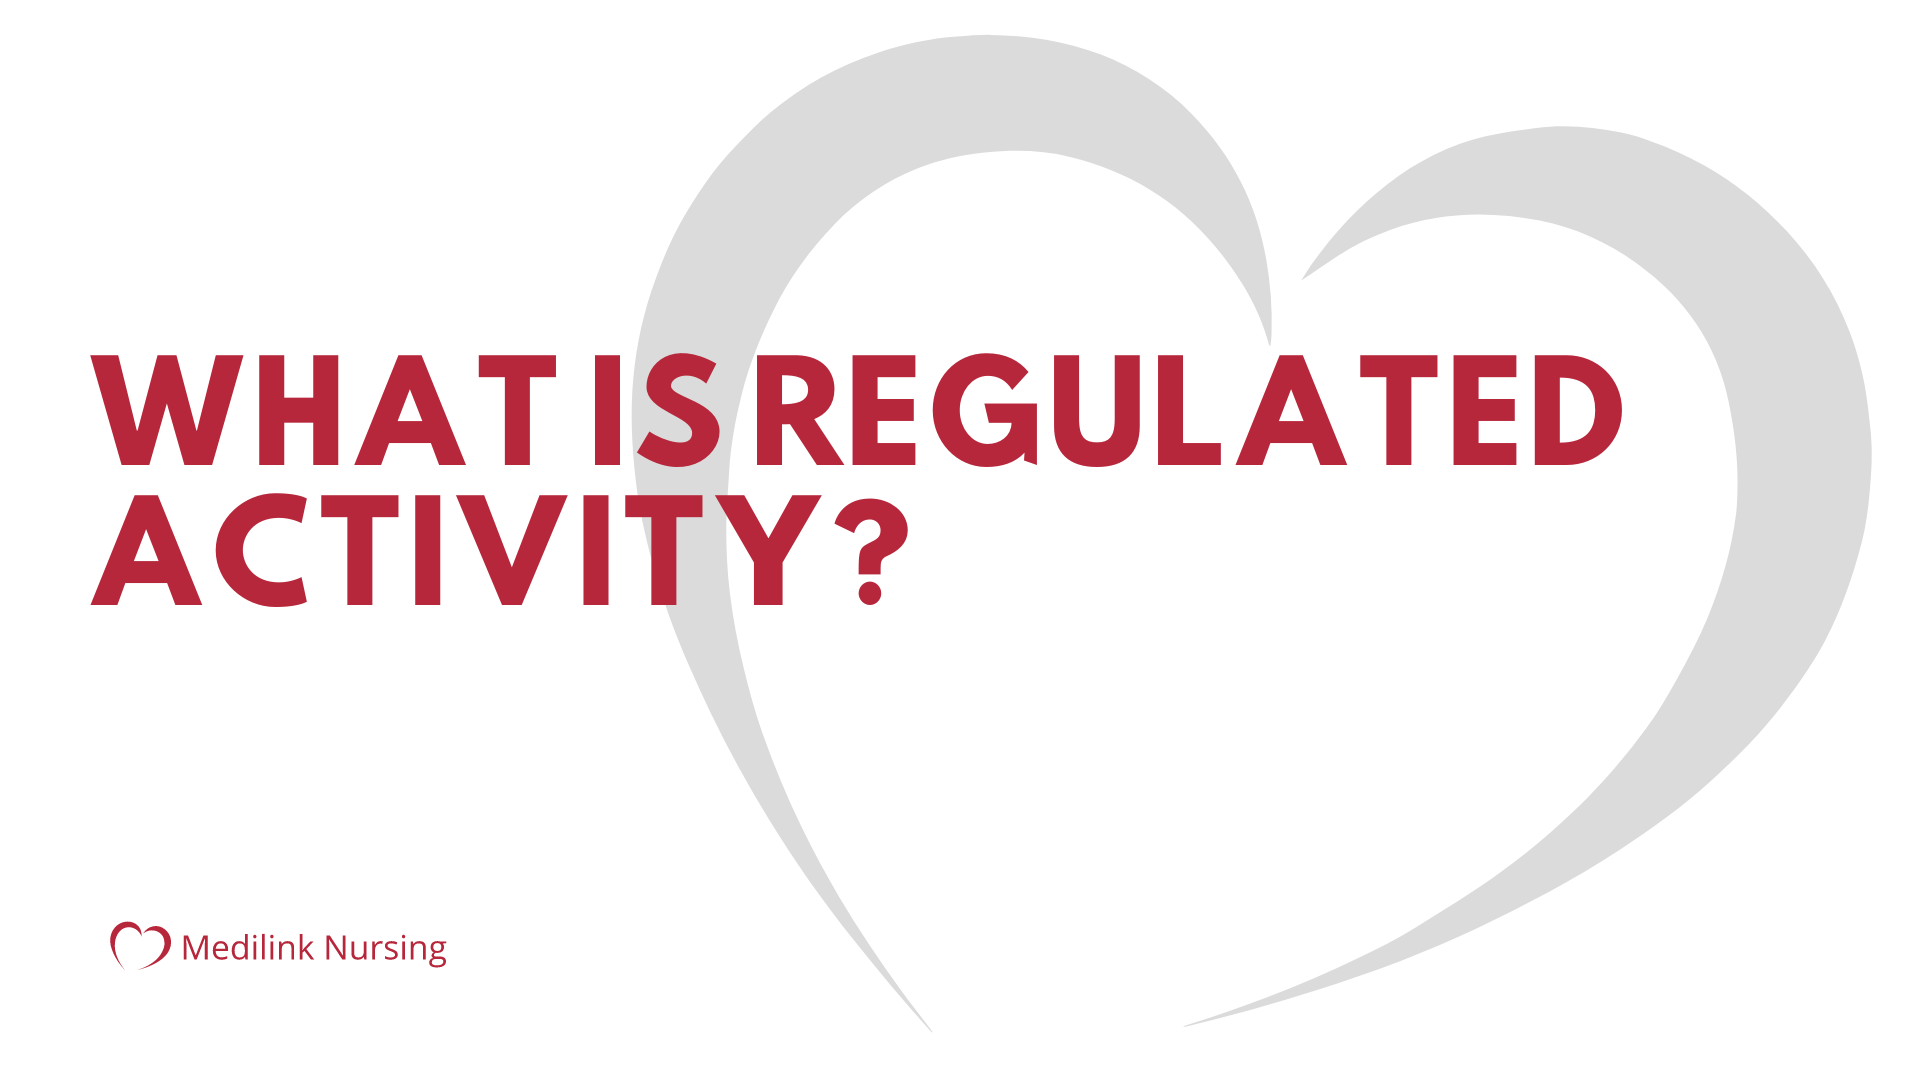 What is regulated activity